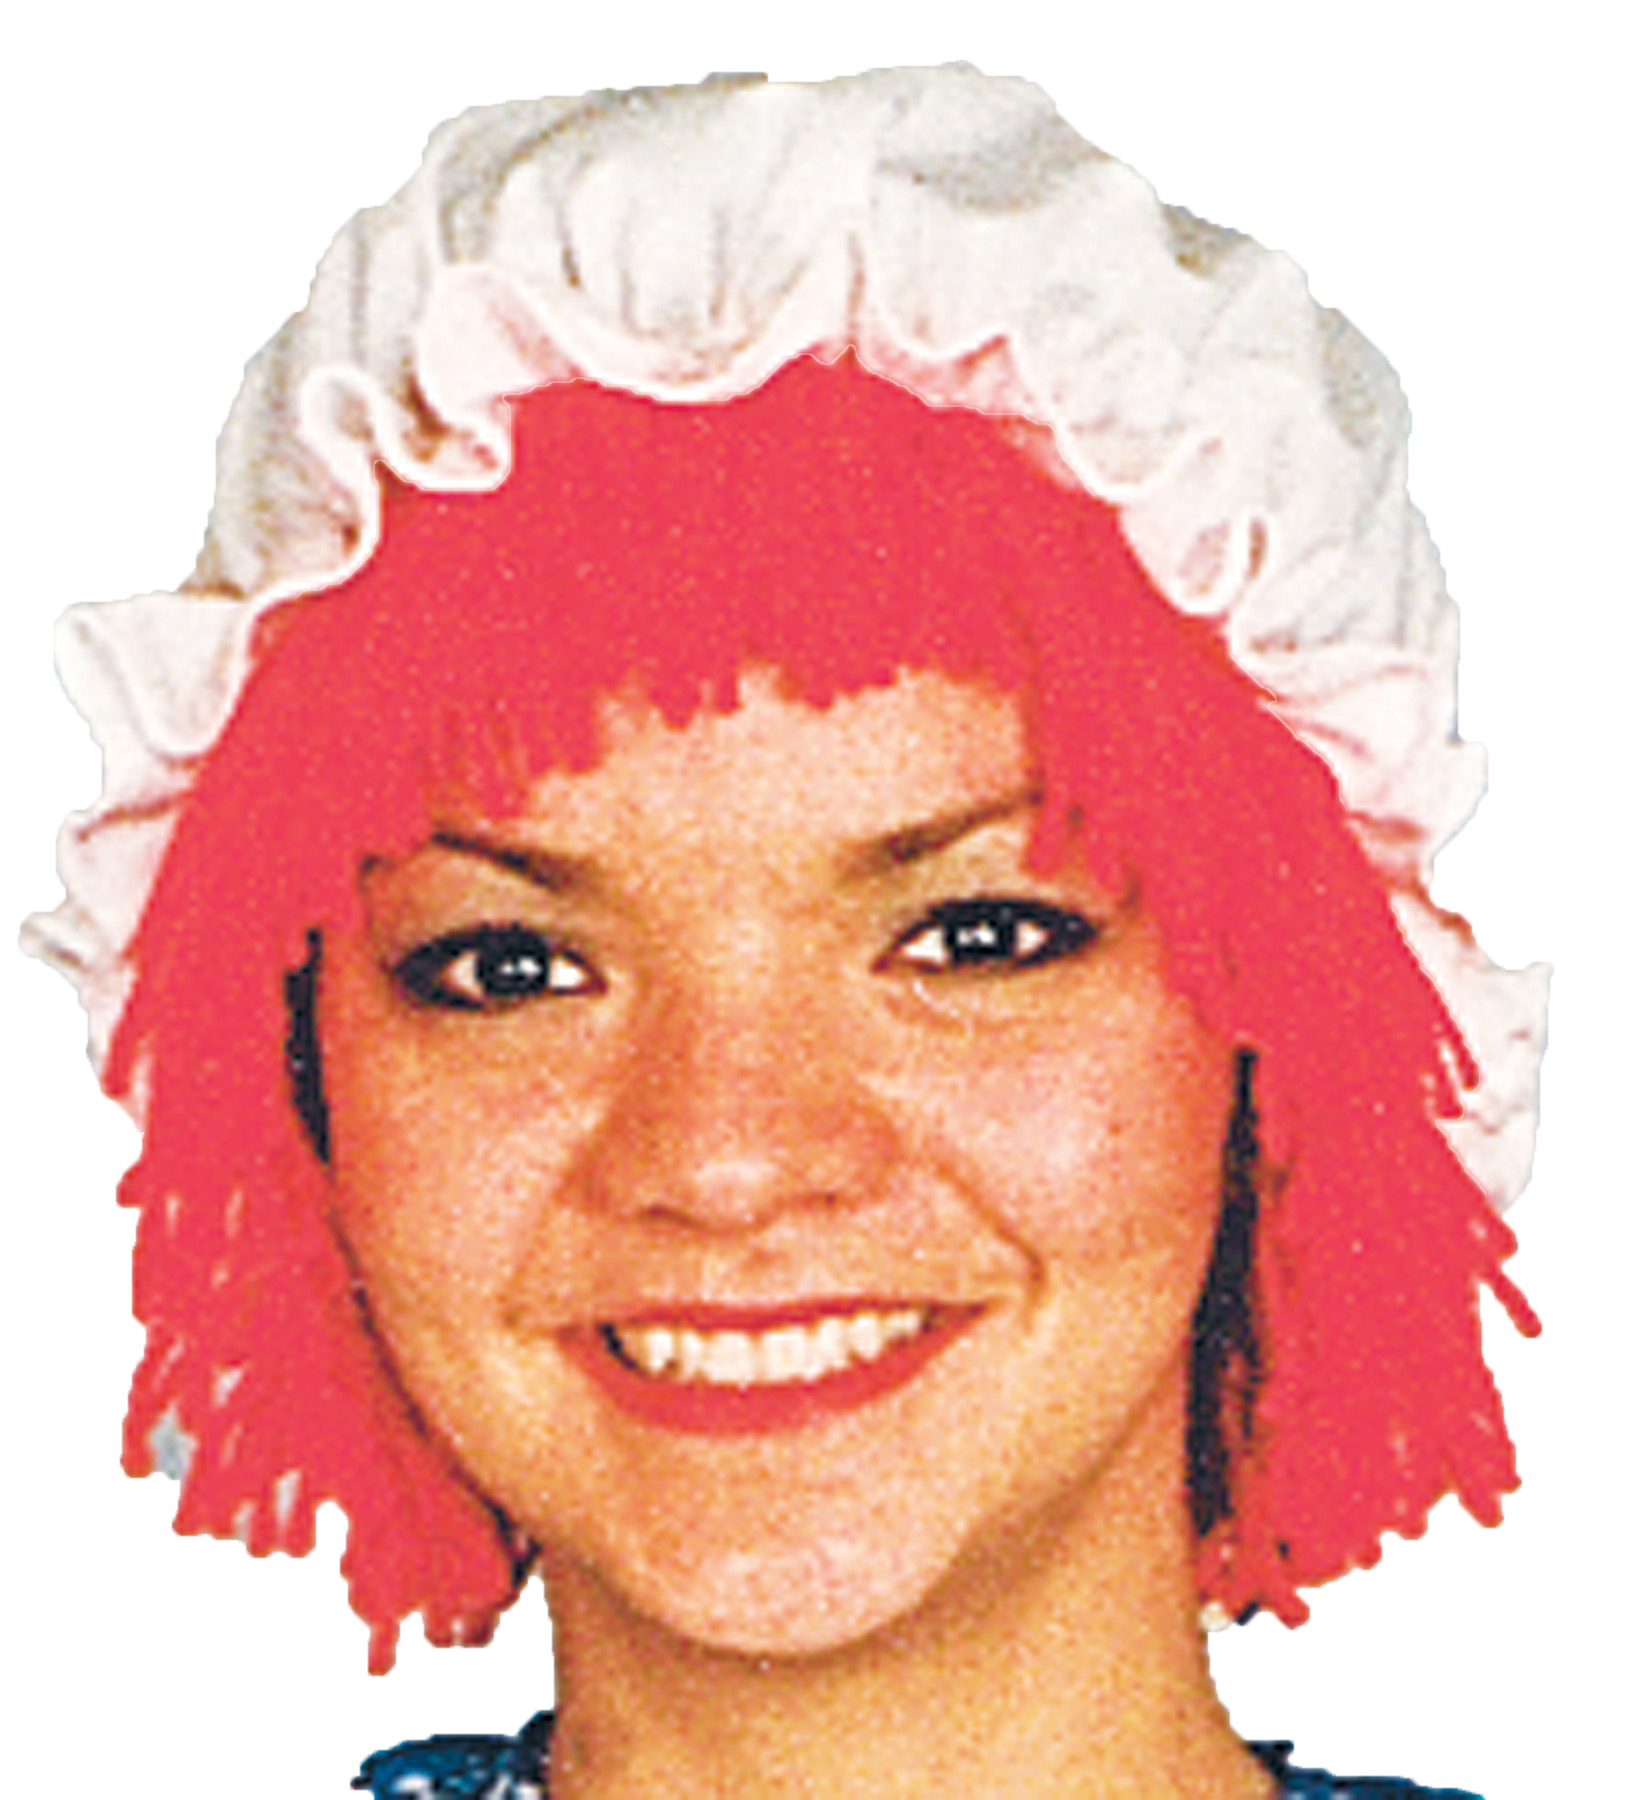 RAGGEDY ANN WIG WITH HAT